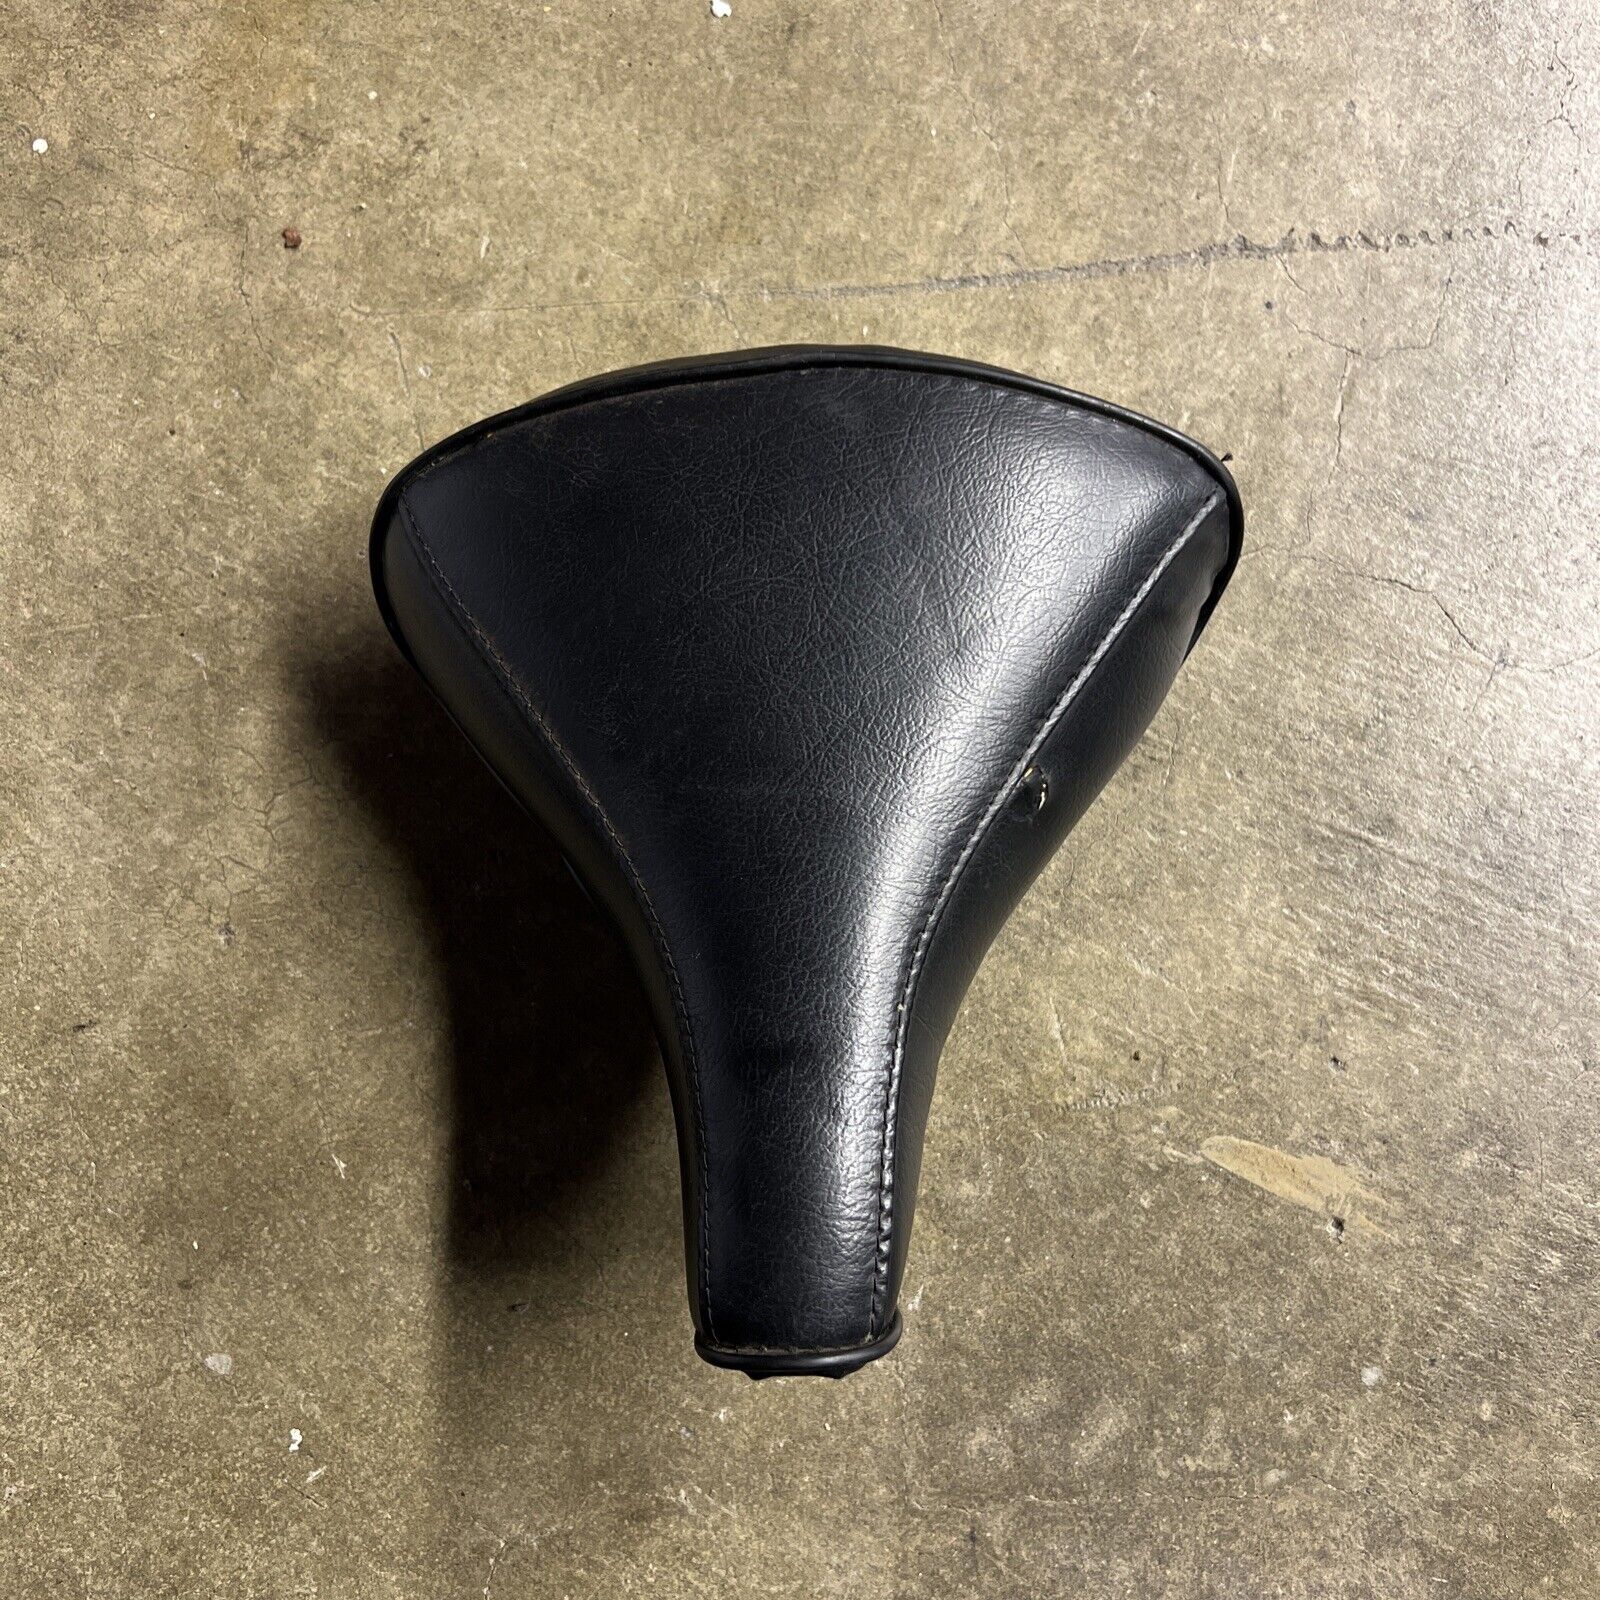 Vintage Persons bicycle SADDLE seat Black Made In USA